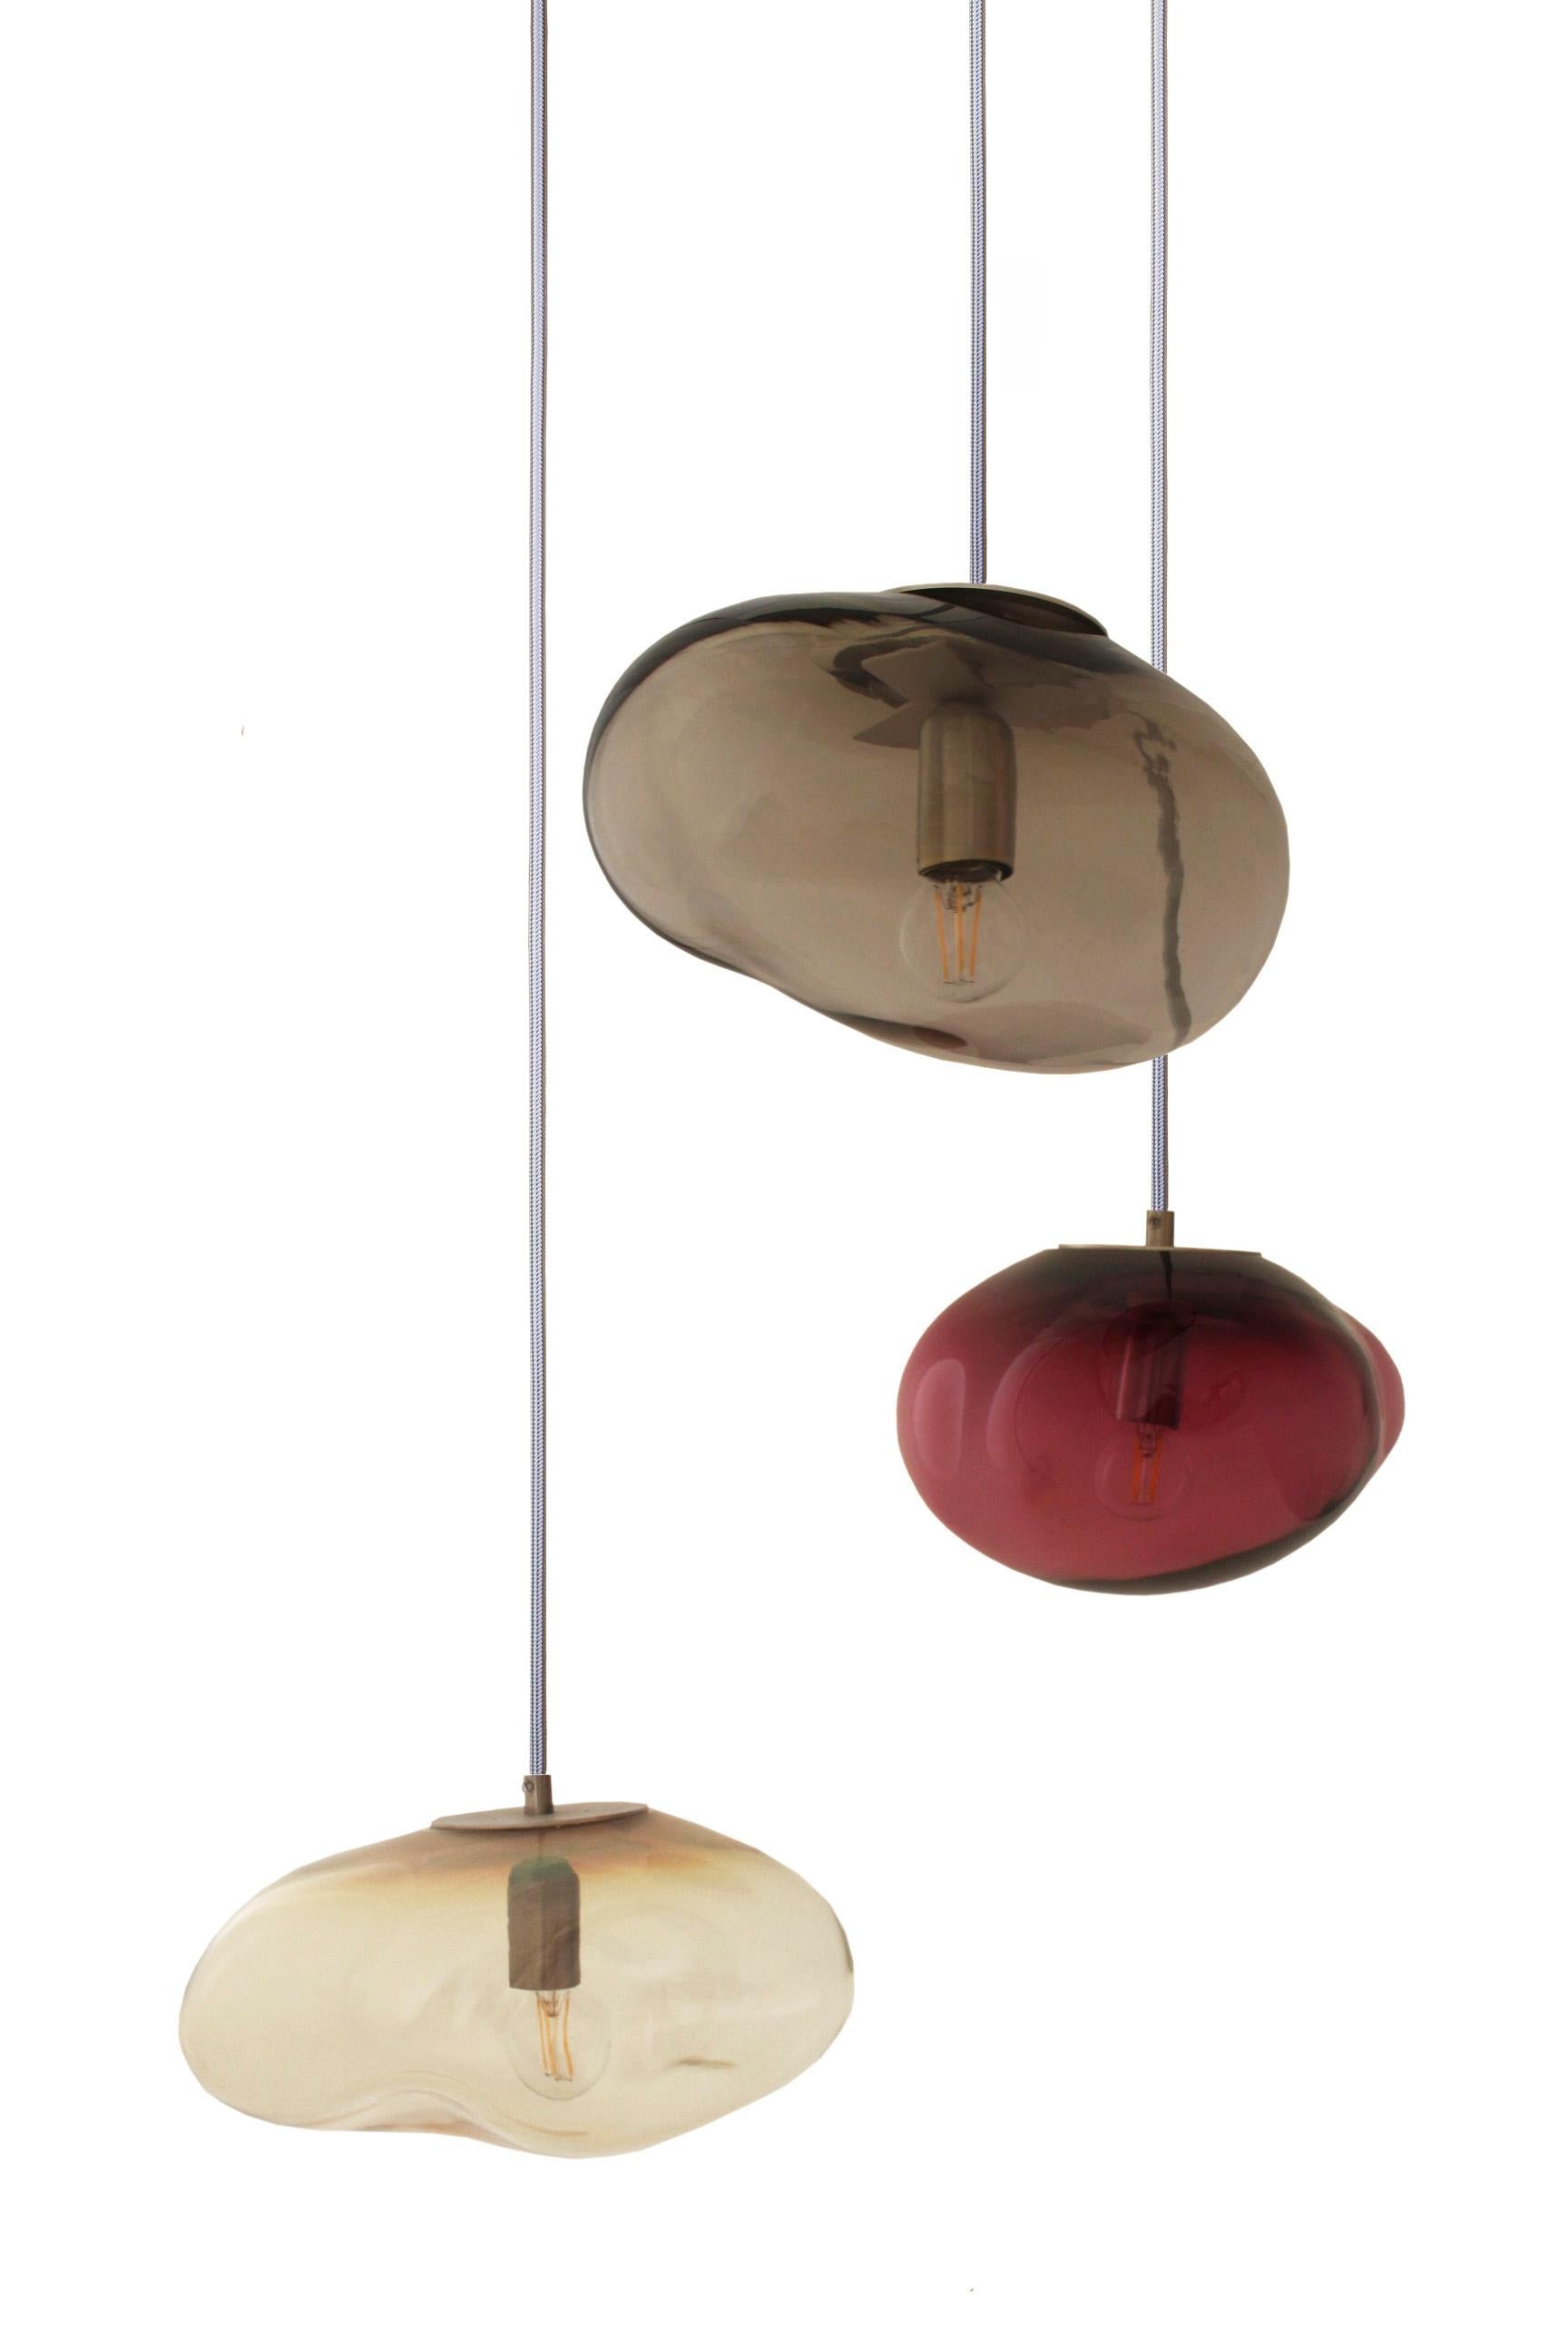 Set of 3 Planetoide pendants by ELOA
No UL listed 
Material: glass, steel, silver, LED Bulb
Dimensions: D30 x W30 x H250 cm
Also available in different colours and dimensions.

All our lamps can be wired according to each country. If sold to the USA